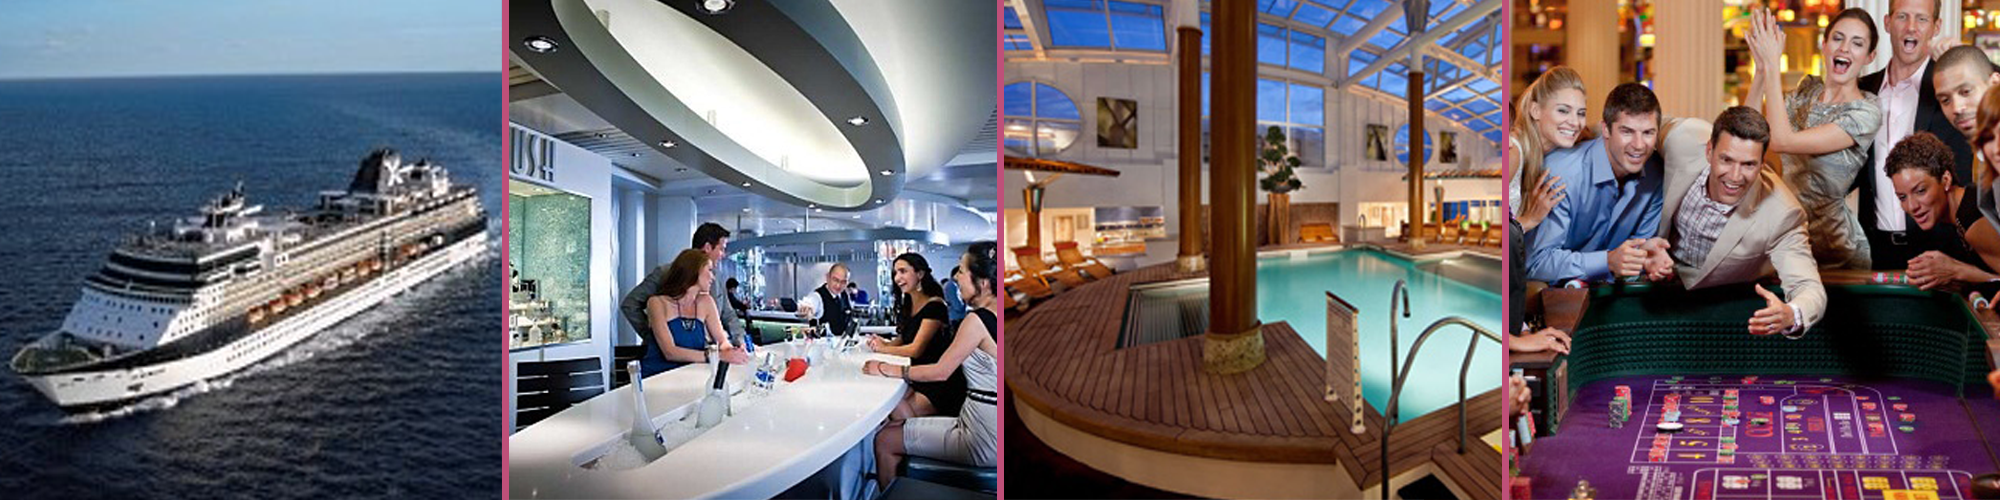 Image Collage of Cruise Ship, A Bar, A Pool, and Group Gambling